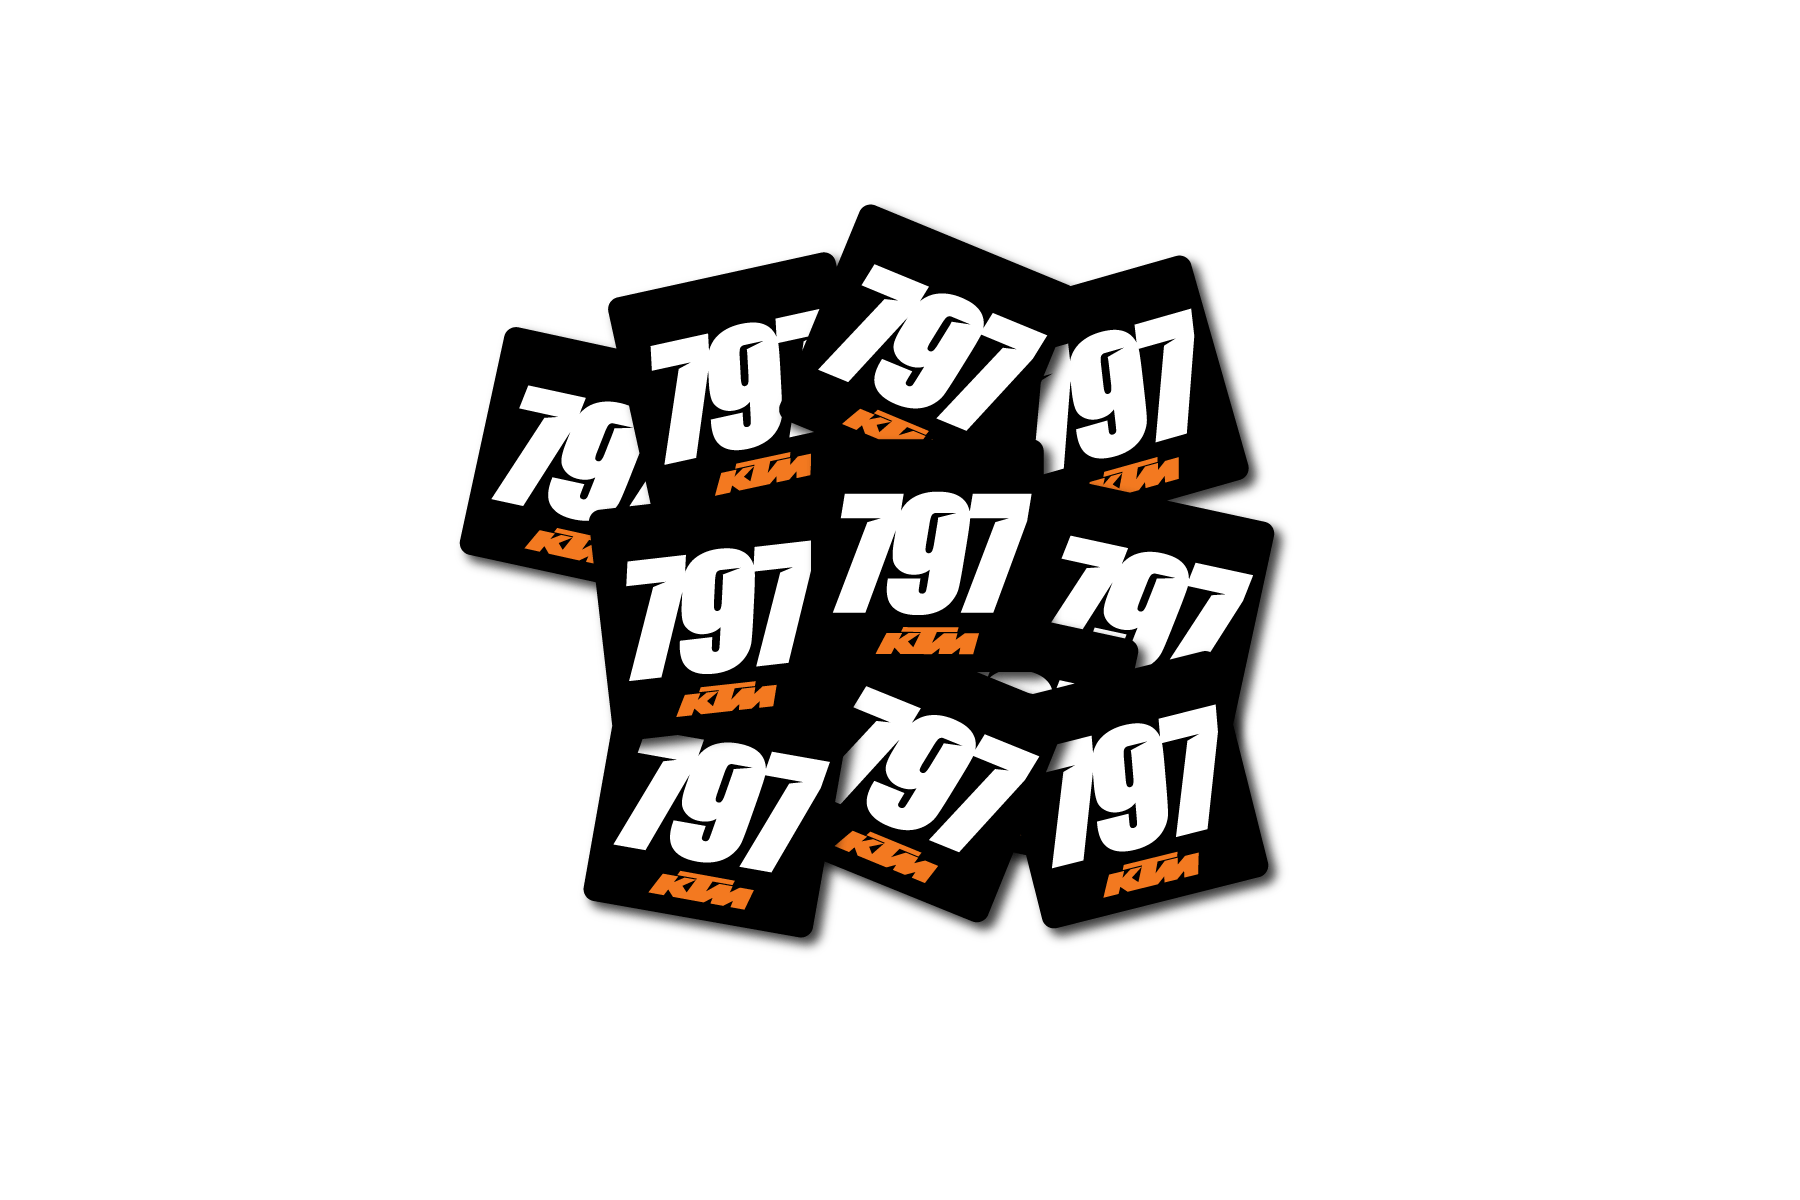 10 Hub Stickers // KTM Logo + Your Number